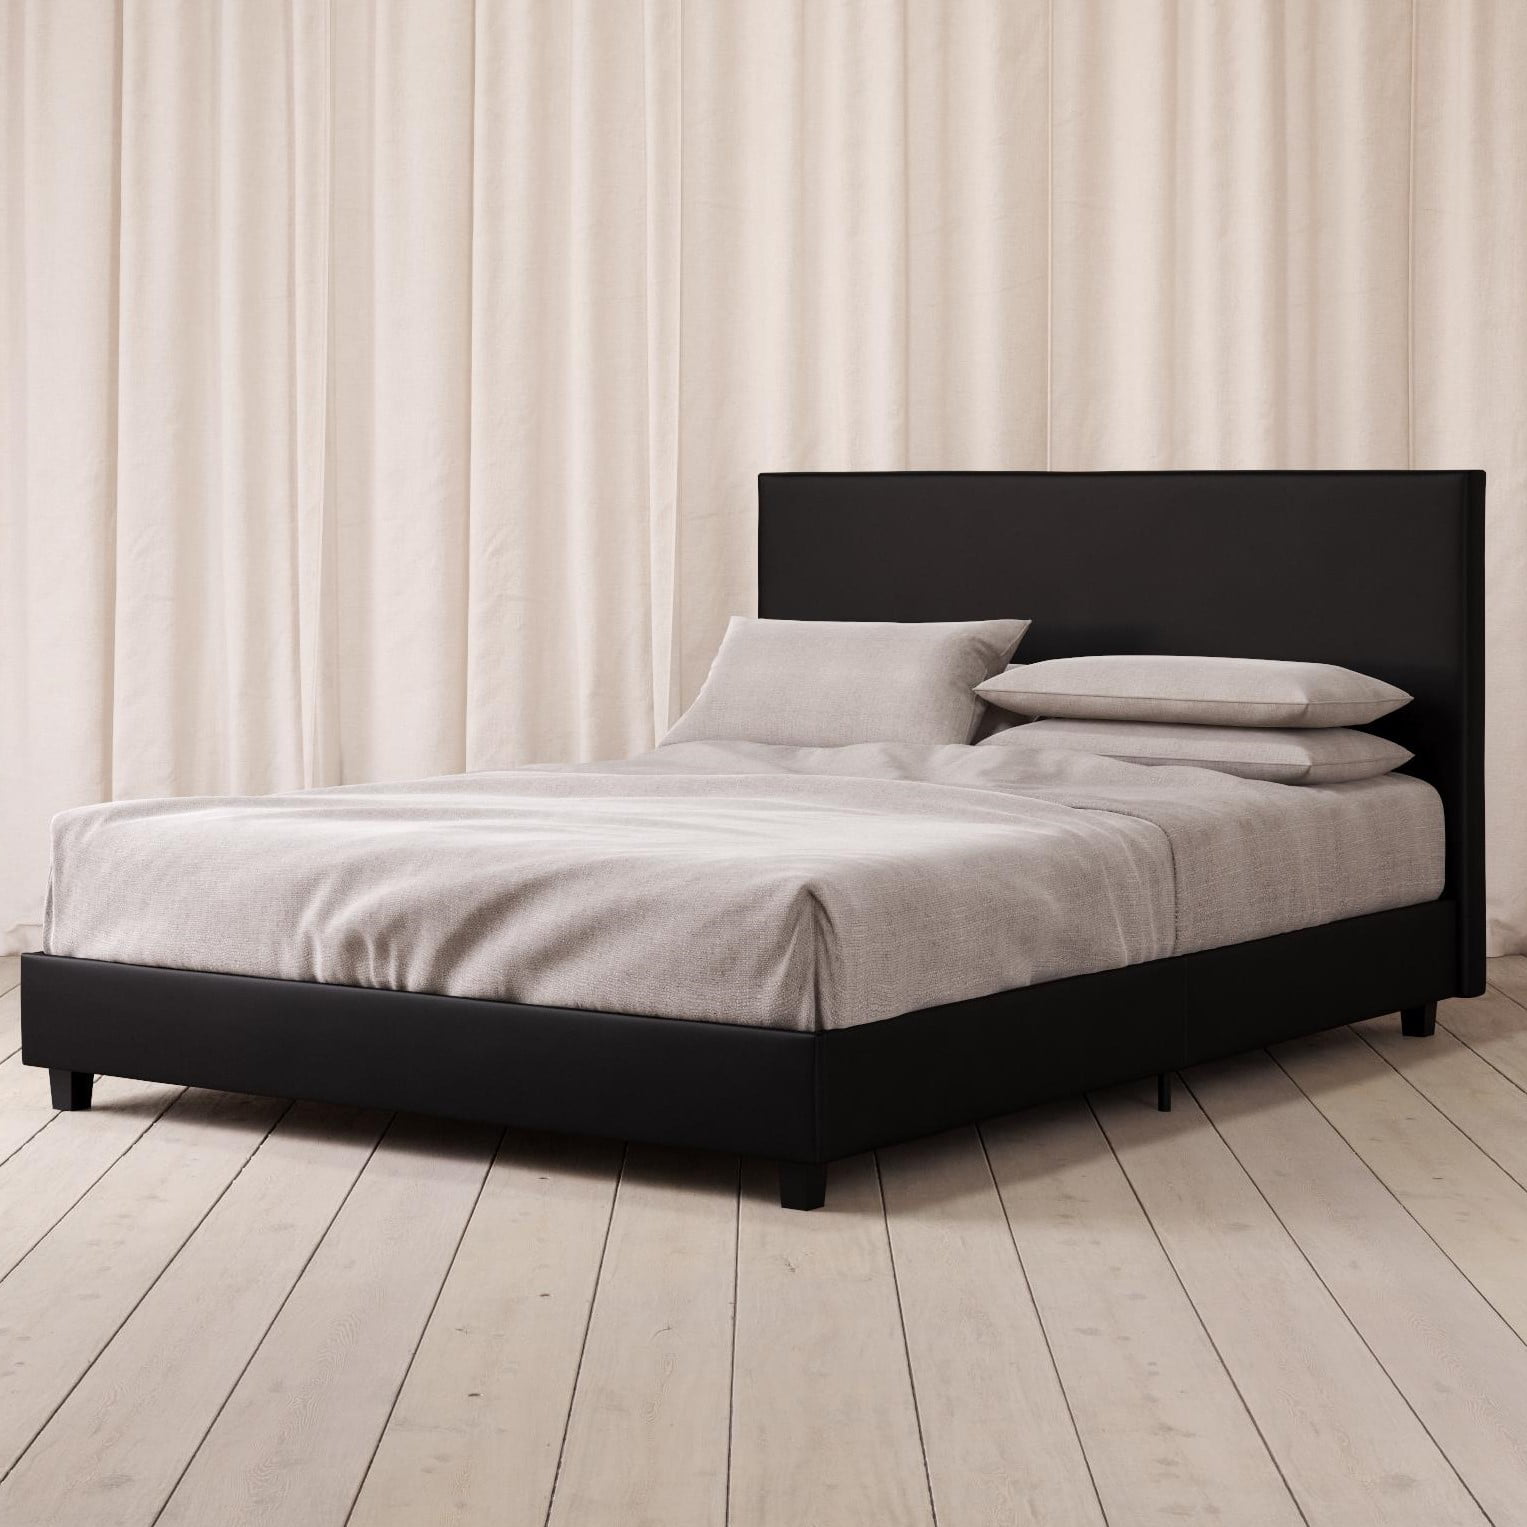 Mainstays Upholstered Bed, Queen Bed Frame, Black Faux Leather